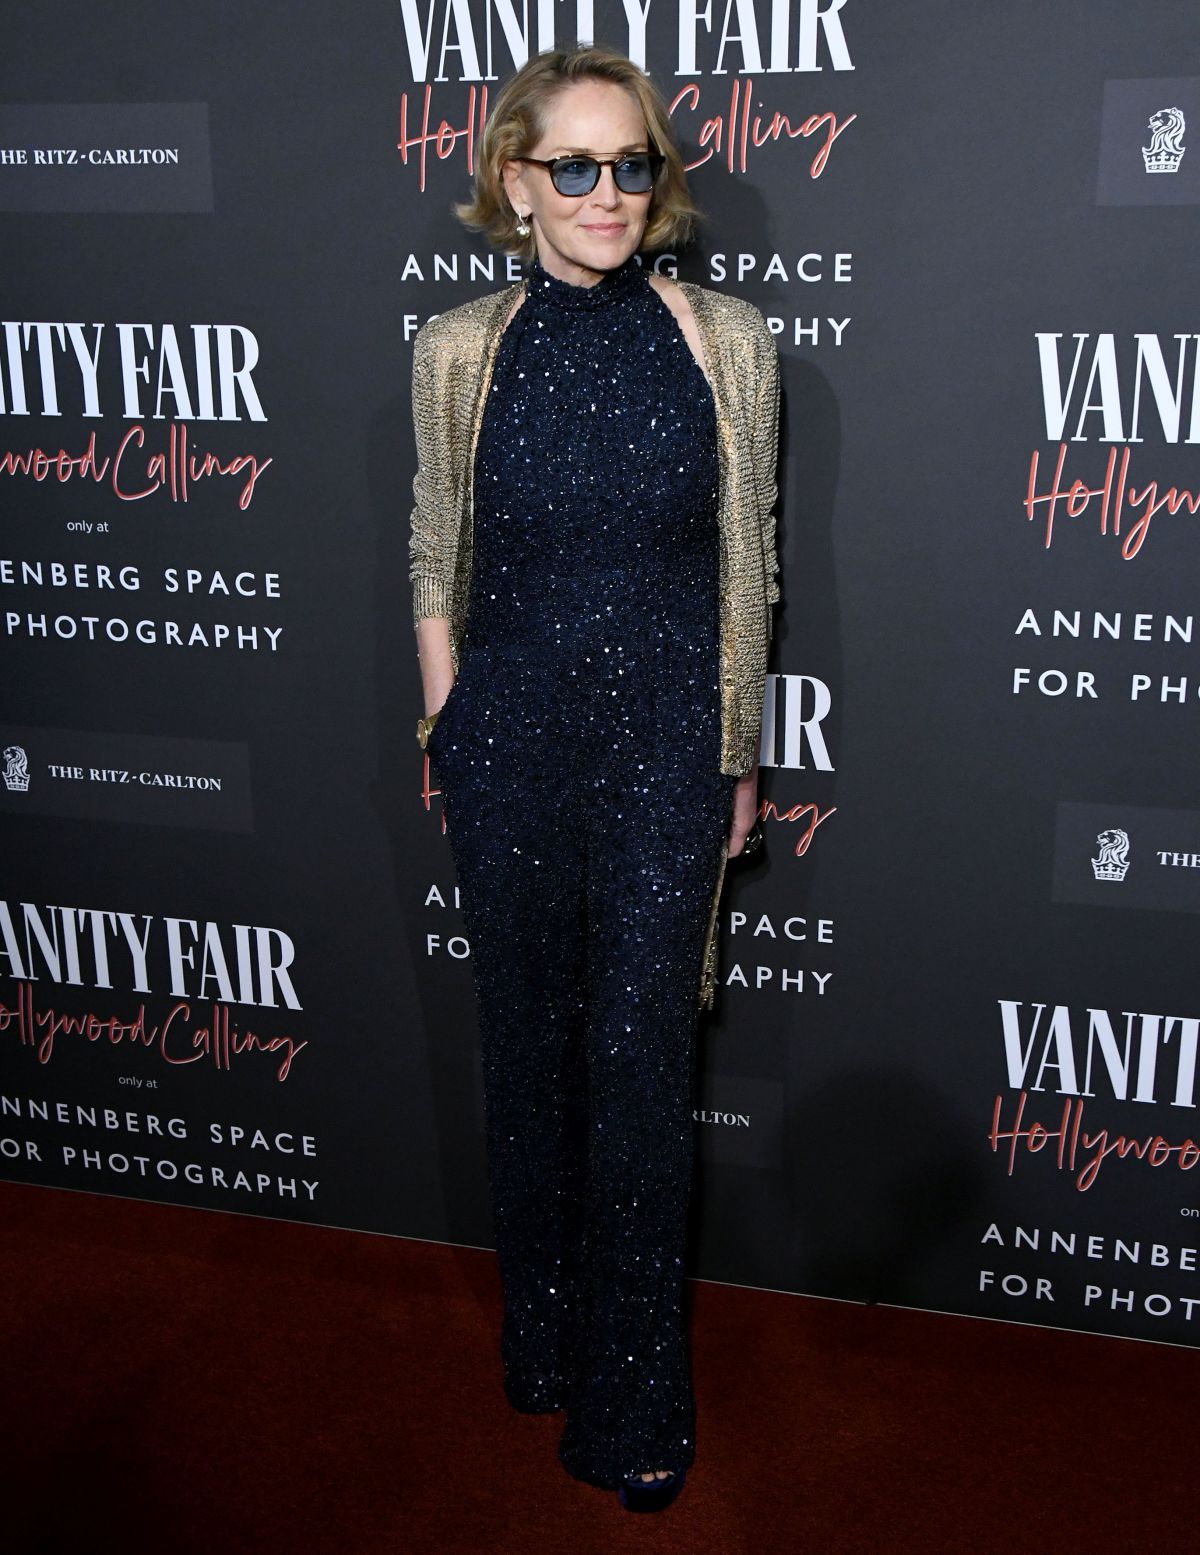 SHARON STONE at Vanity Fair: Hollywood Calling Opening in Century City ...